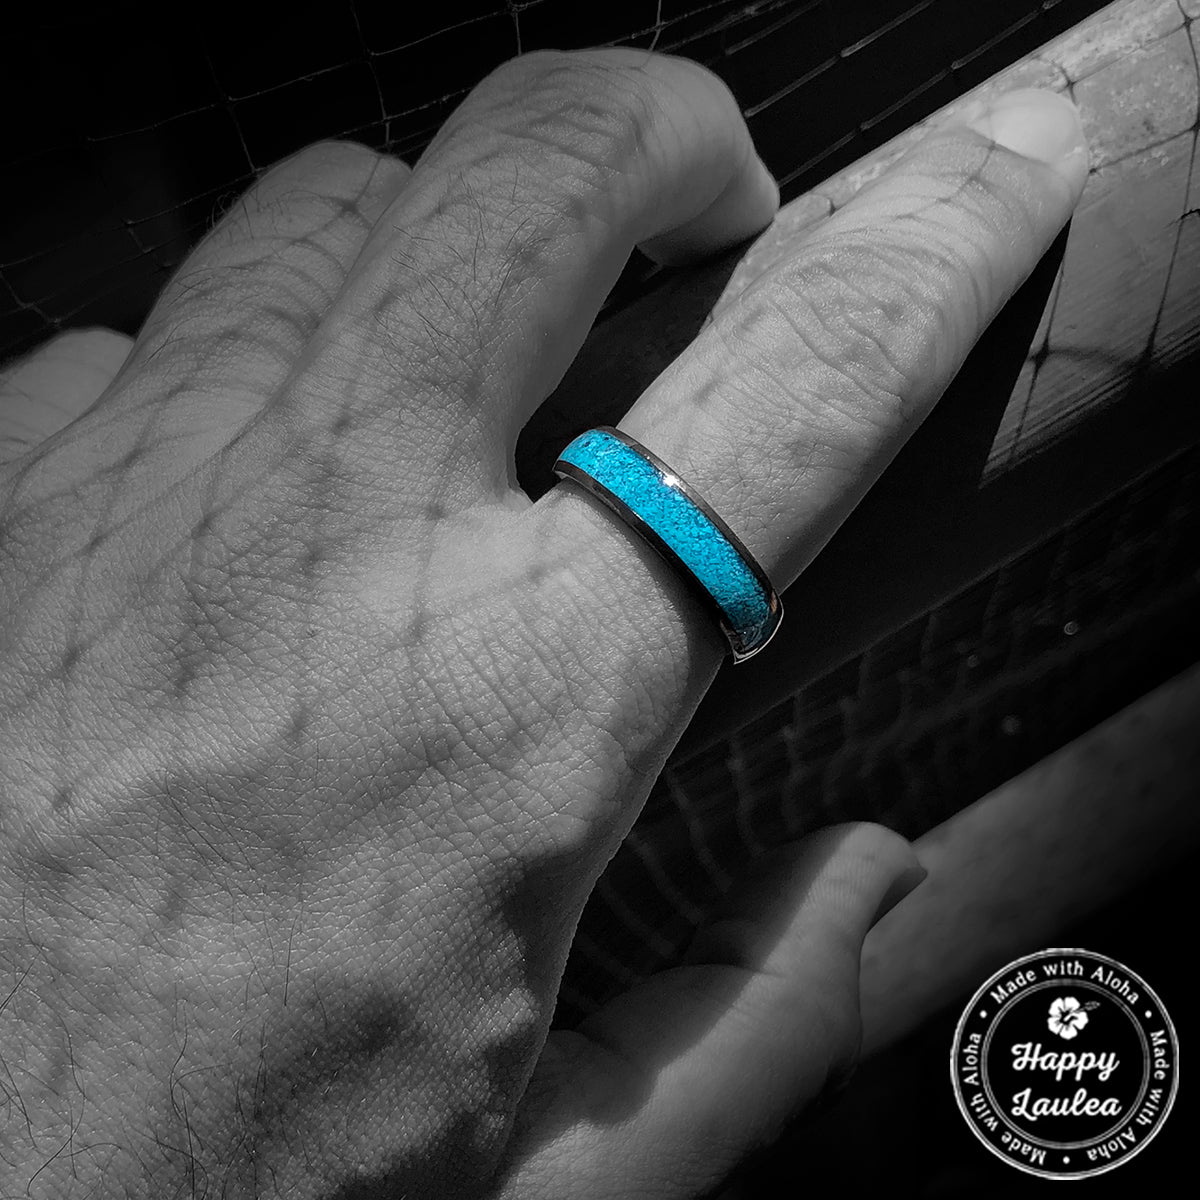 Black Zirconium Ring with Crushed Turquoise Inlay - 6mm, Dome Shape, Comfort Fitment